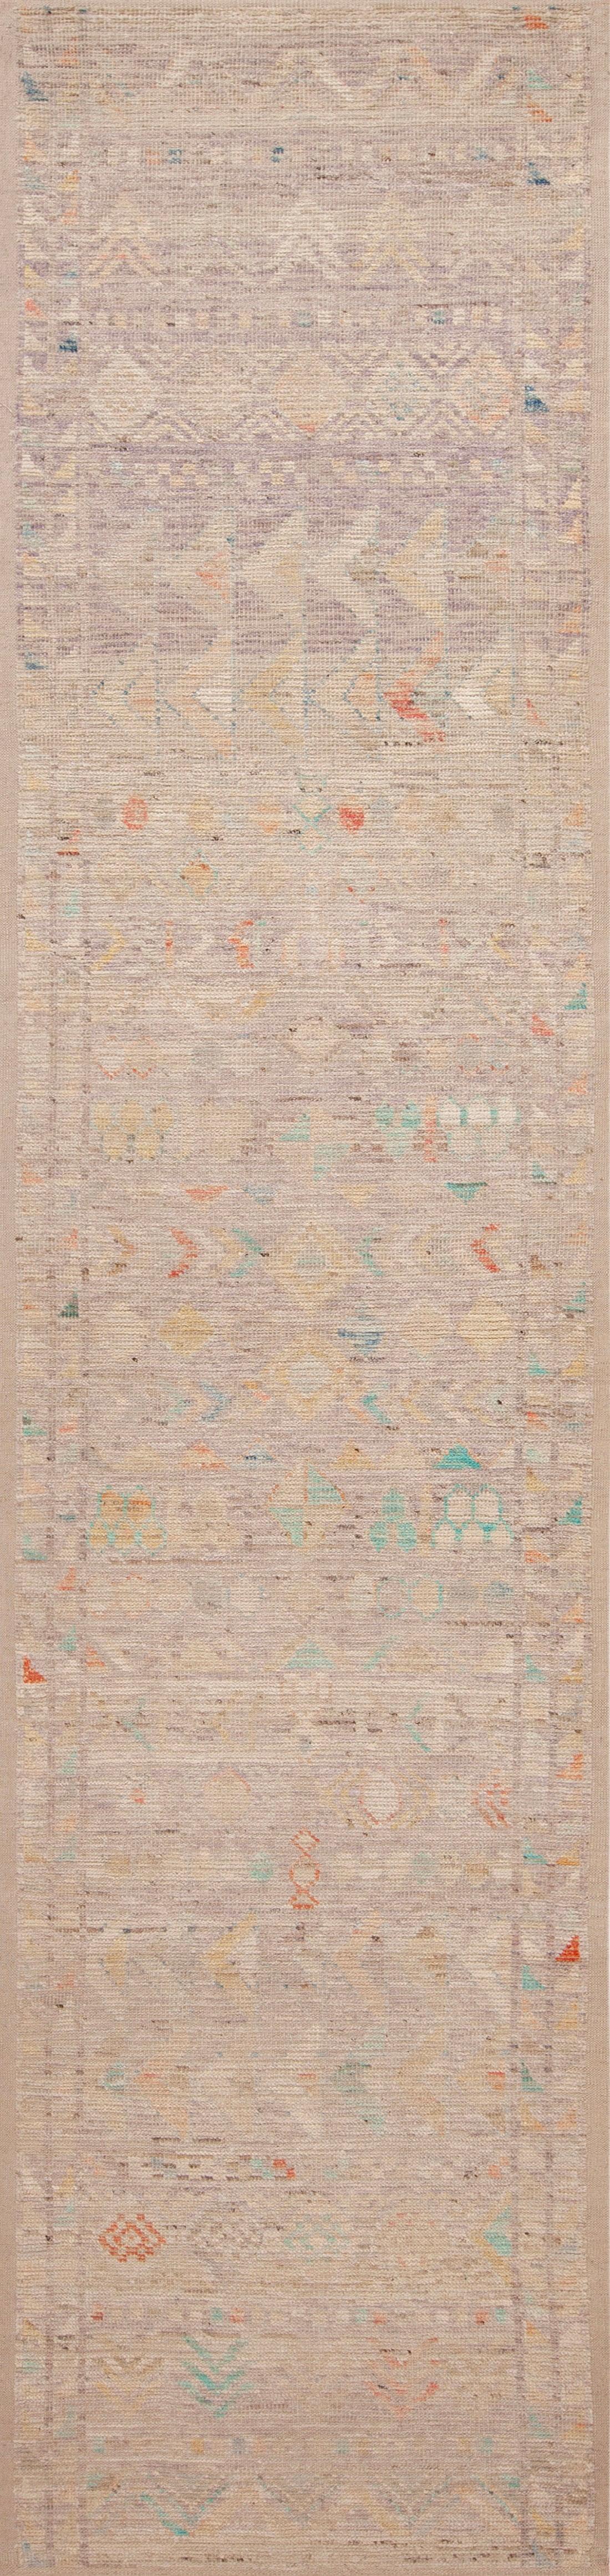 A Decorative Tribal And Geometric Design Light Pastel Color Abrash Modern Hallway Runner Area Rug, Country Of The Rug Origin: Central Asia, Circa / Weave Date: Modern Newly Made Area Rug 